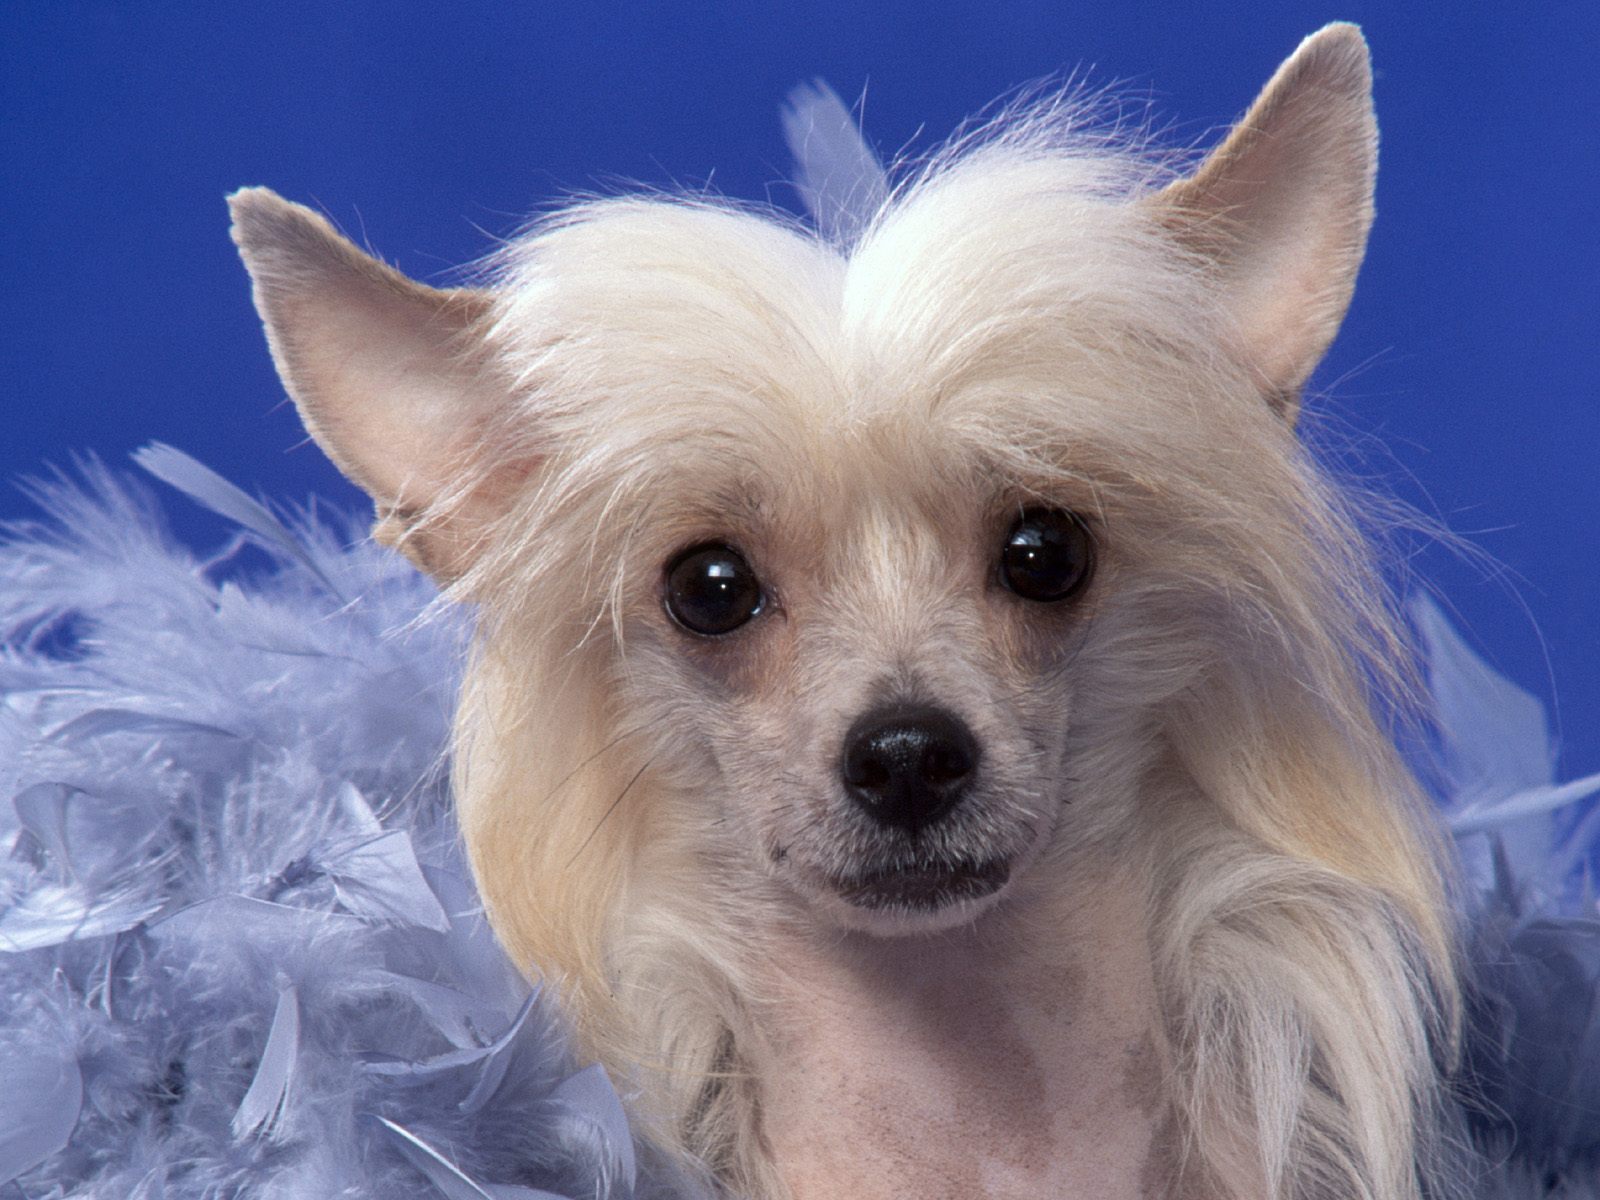 Pyramid Chinese Crested Dog - Chinese Crested Dog - HD Wallpaper 